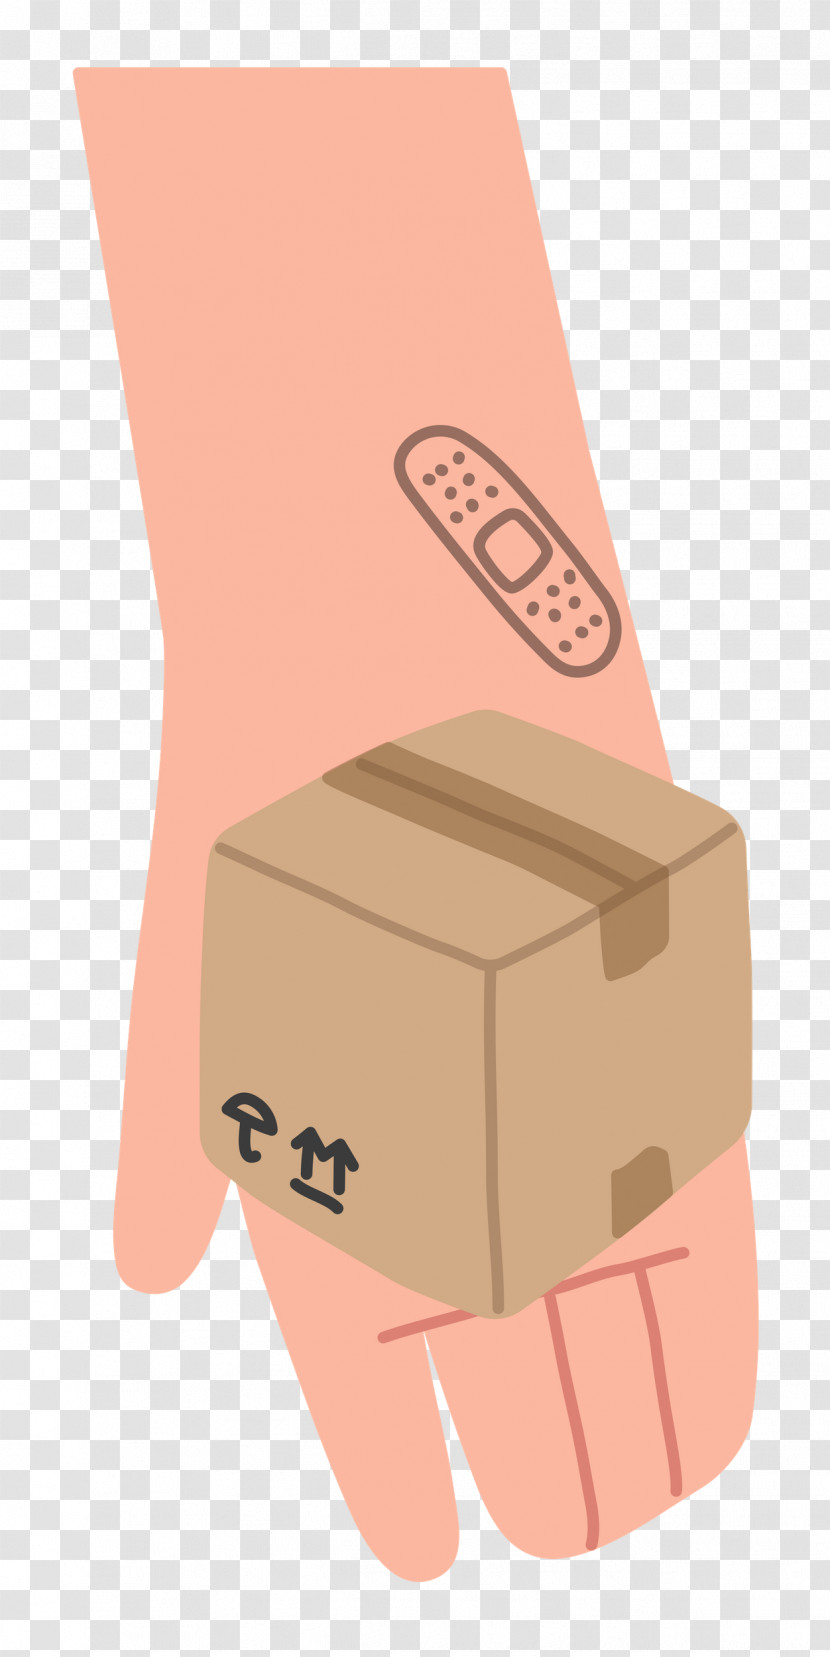 Hand Giving Box Transparent PNG